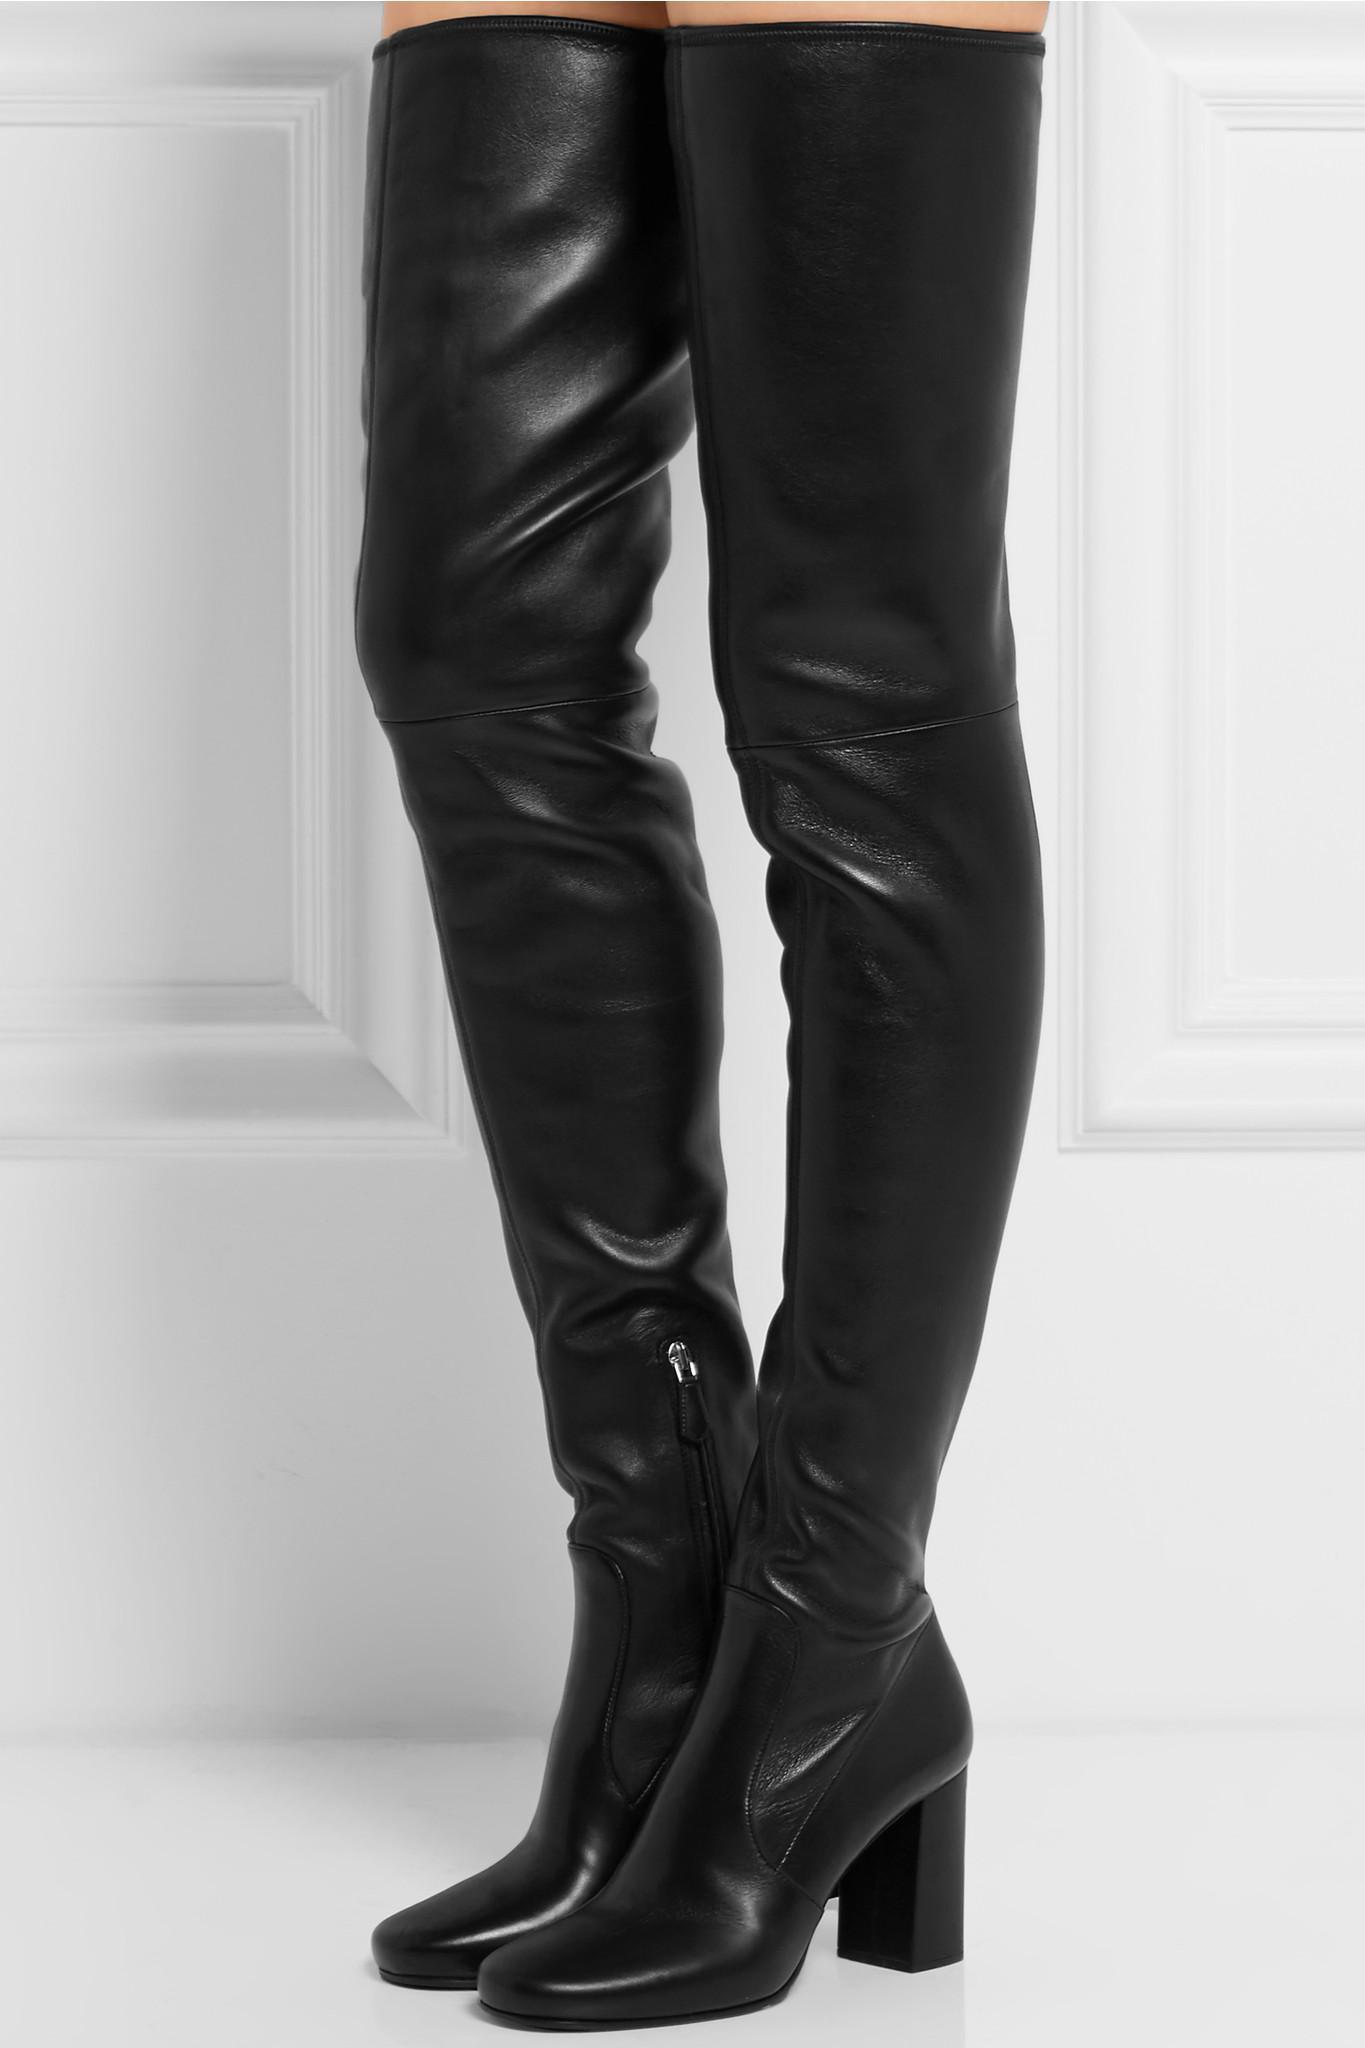 Over-the-Knee Chic: Long Prada Boots